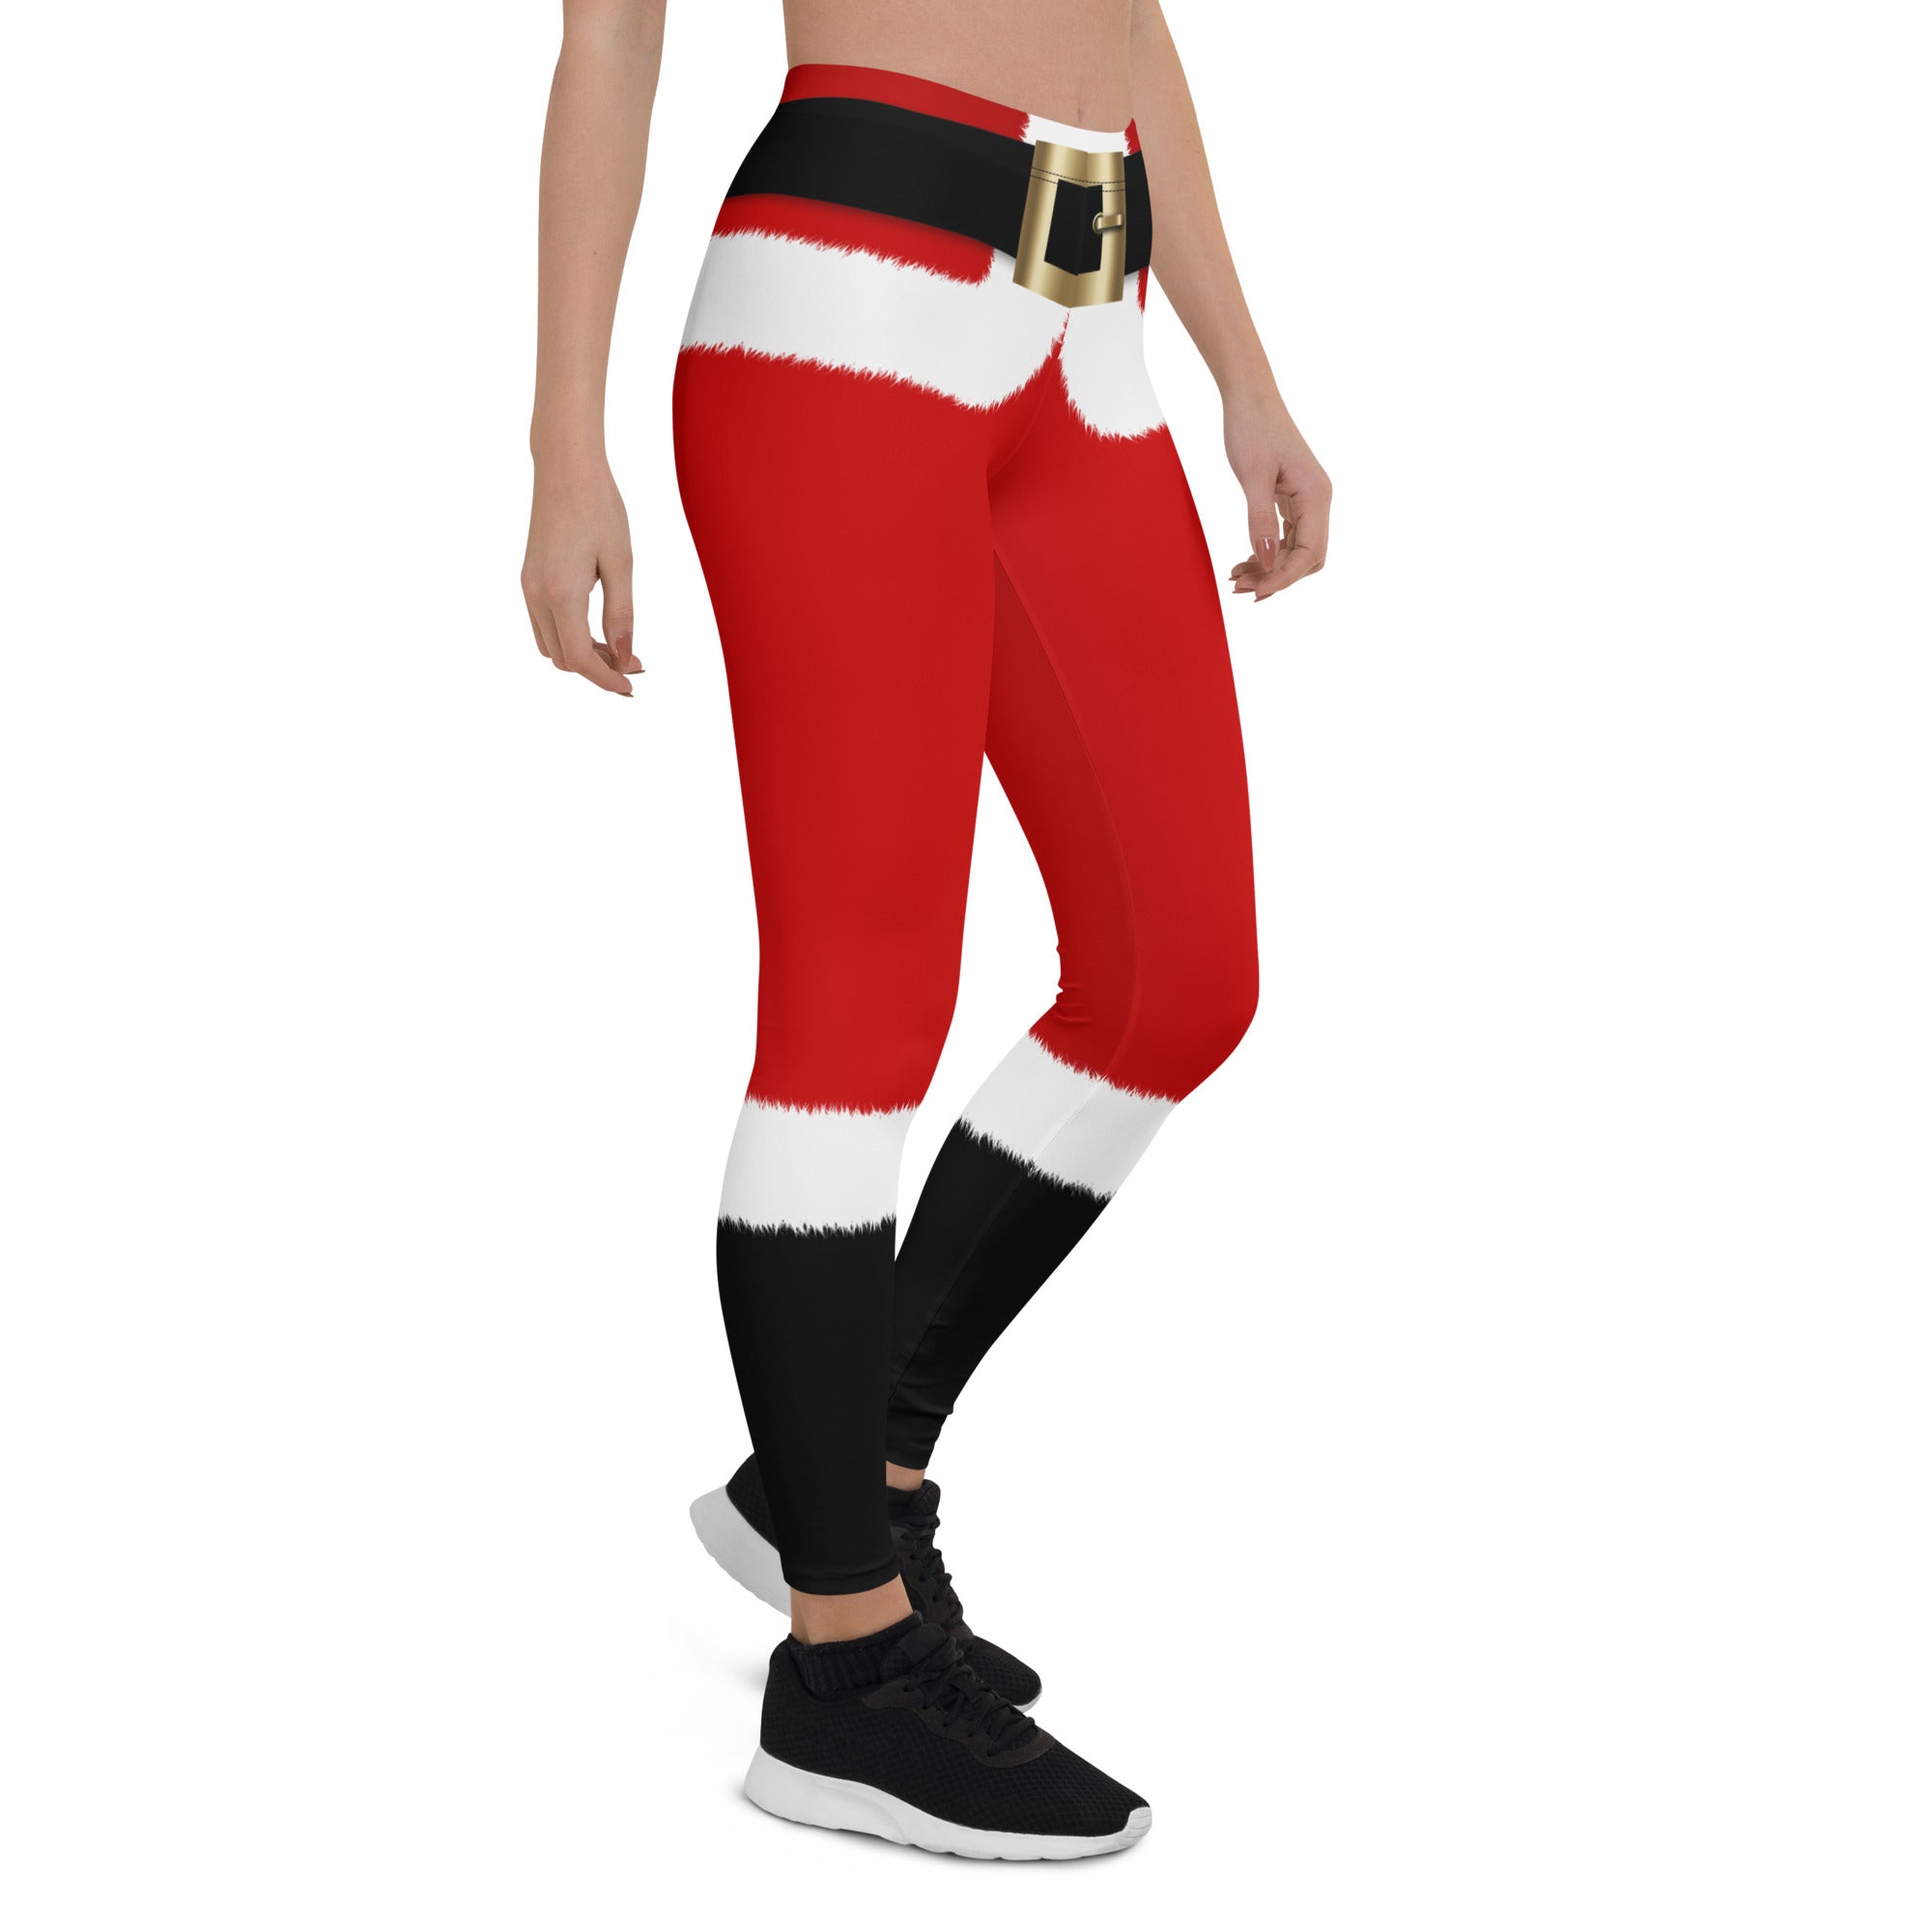 Christmas Athletic Costume Yoga Shorts Sports Bra Women's Running Cosplay  Snowflakes Stripes Festive Workout Fitness Outfit Corset Red Gym -   Canada